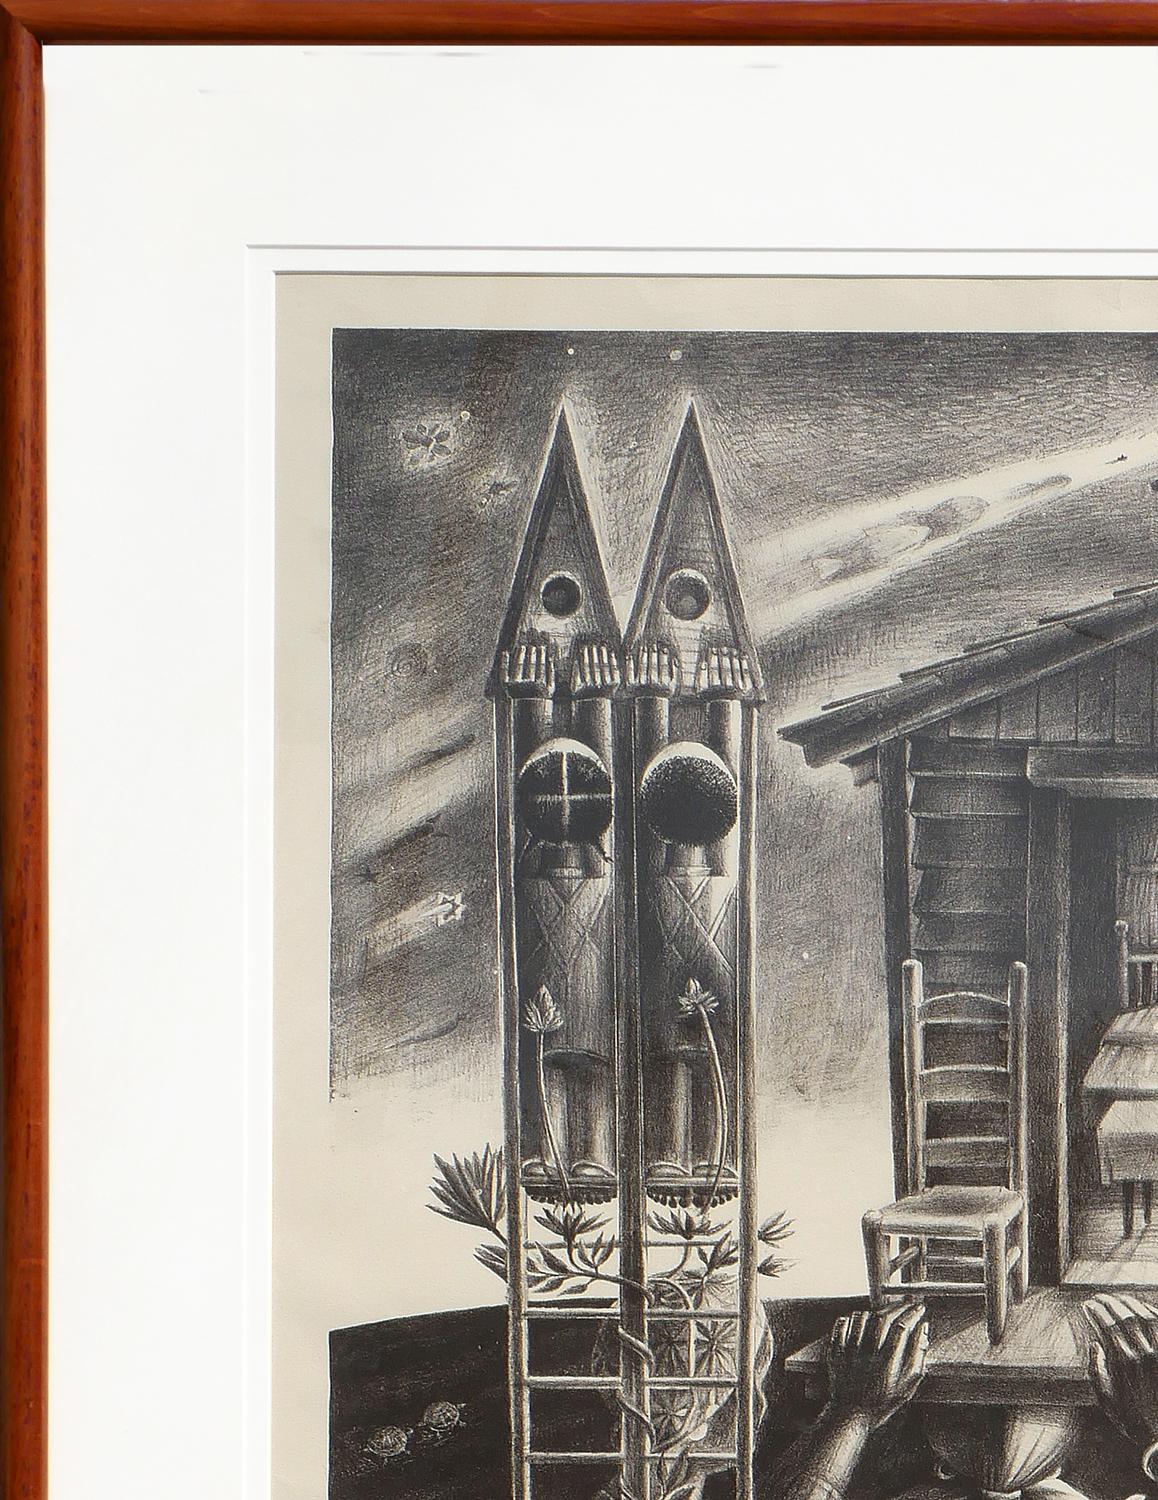 Modern abstract figurative lithograph by renowned artist John Biggers. The work features a trio of women carrying a house on their backs set against a rural landscape. Signed, titled, dated, and editioned along the front lower margin. Currently hung